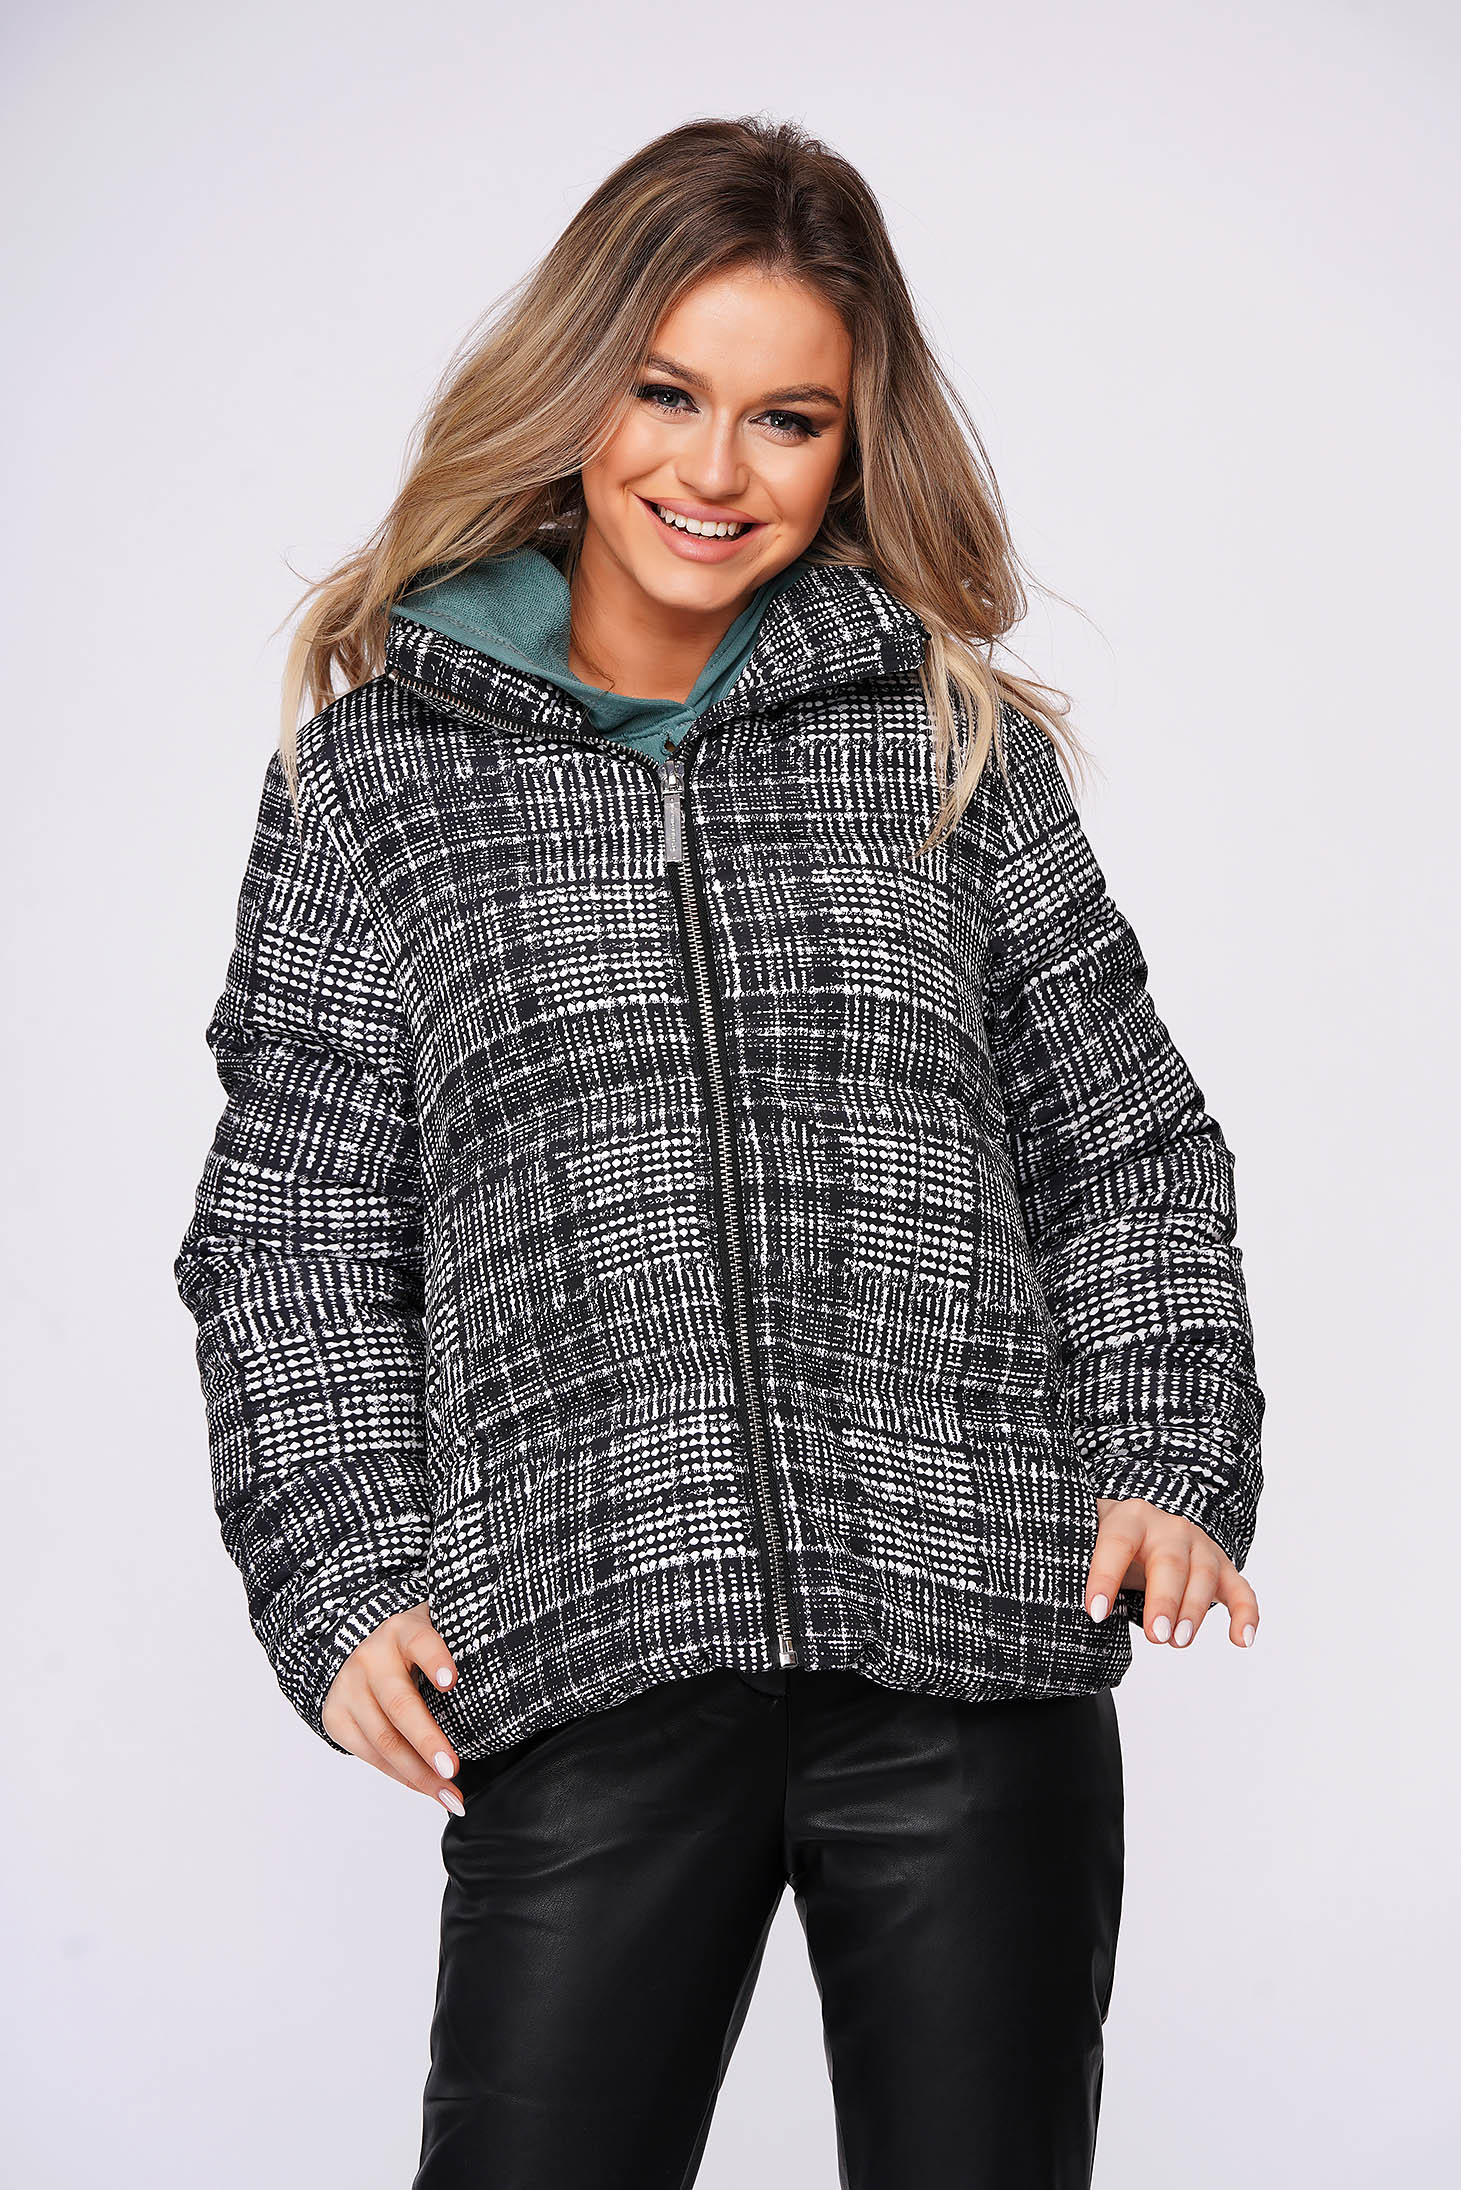 Top Secret grey casual jacket with straight cut long sleeved plaid fabric